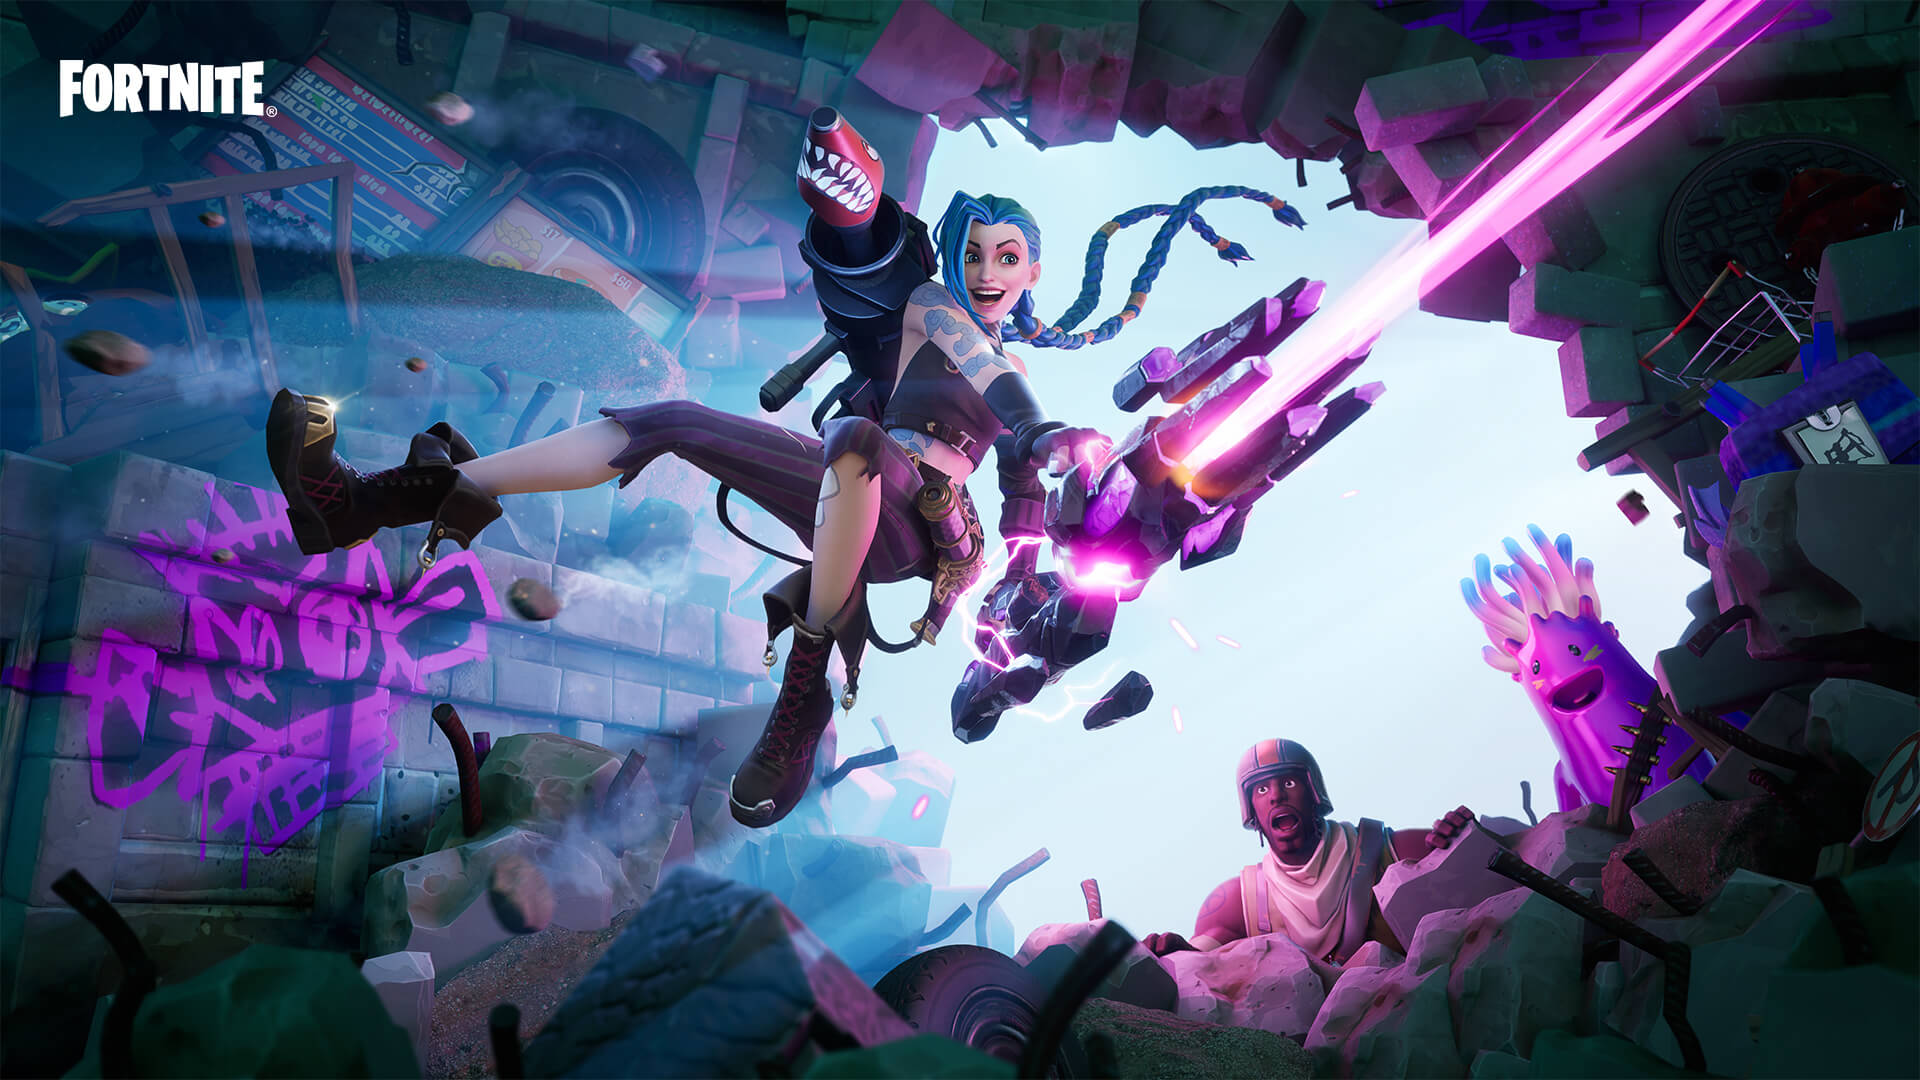 Fortnite officially reveals the League of Legends Set